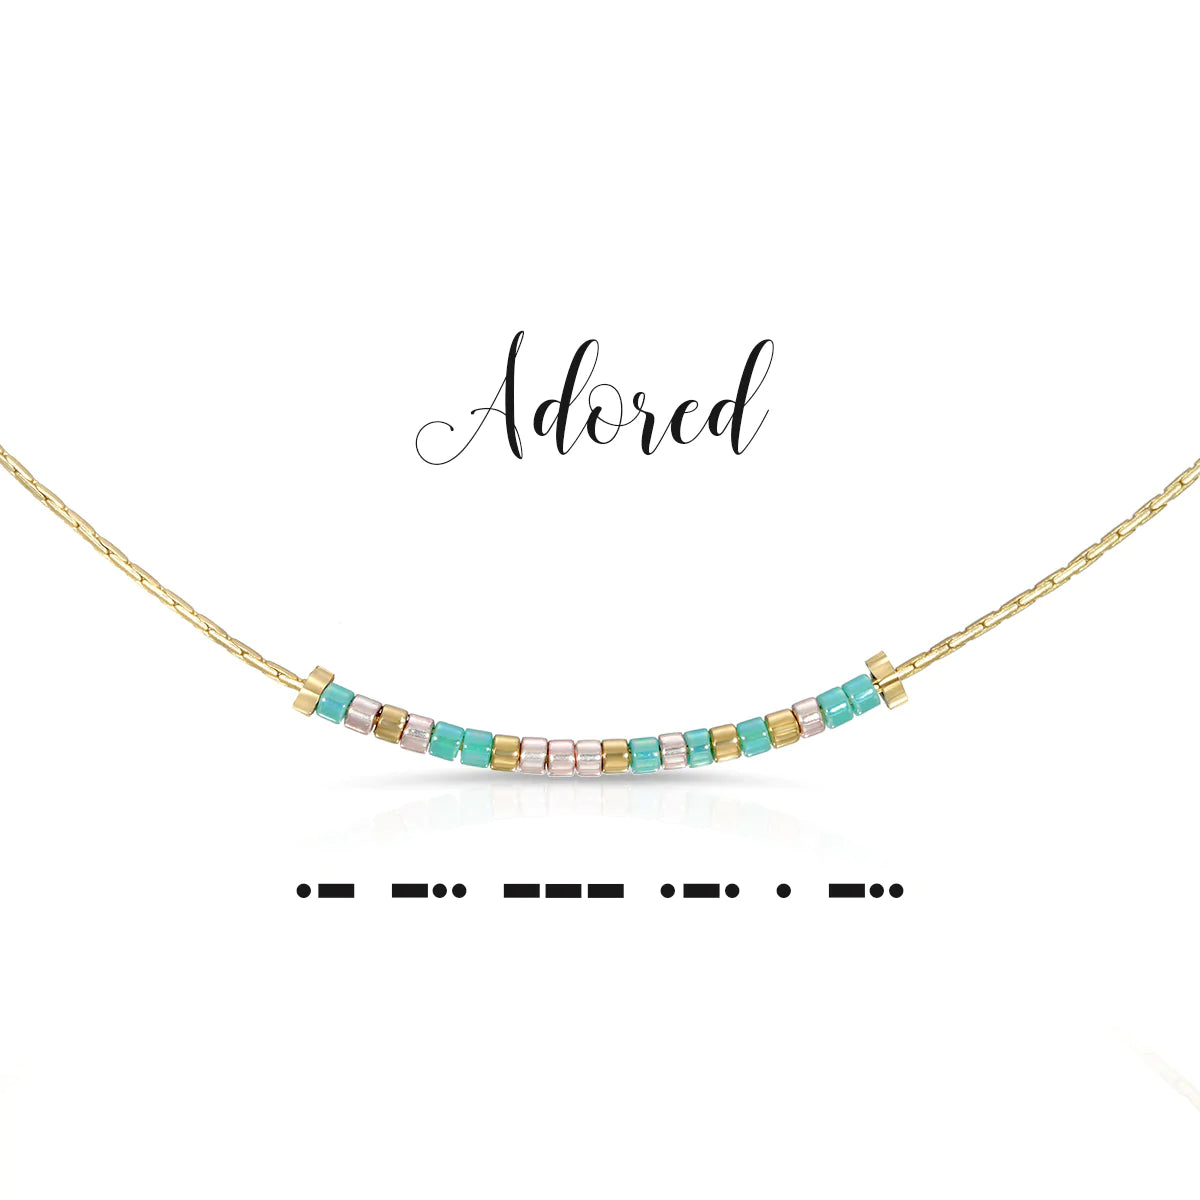 DOT AND DASH NECKLACE